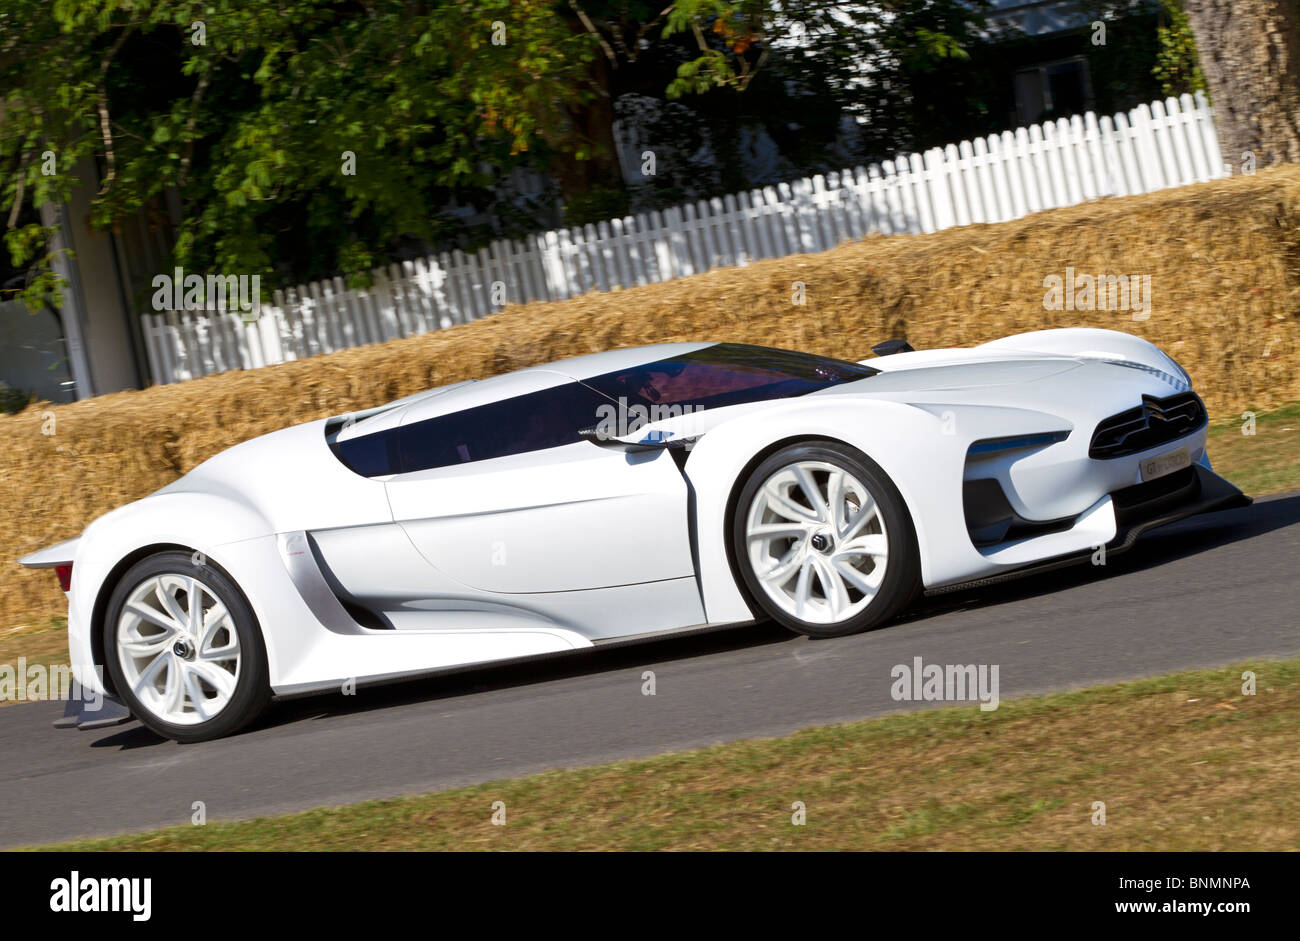 2008 Citroen GT concept car at the 2010 Goodwood Festival of Speed, Sussex, England, UK. Built for the Gran Turismo video game. Stock Photo